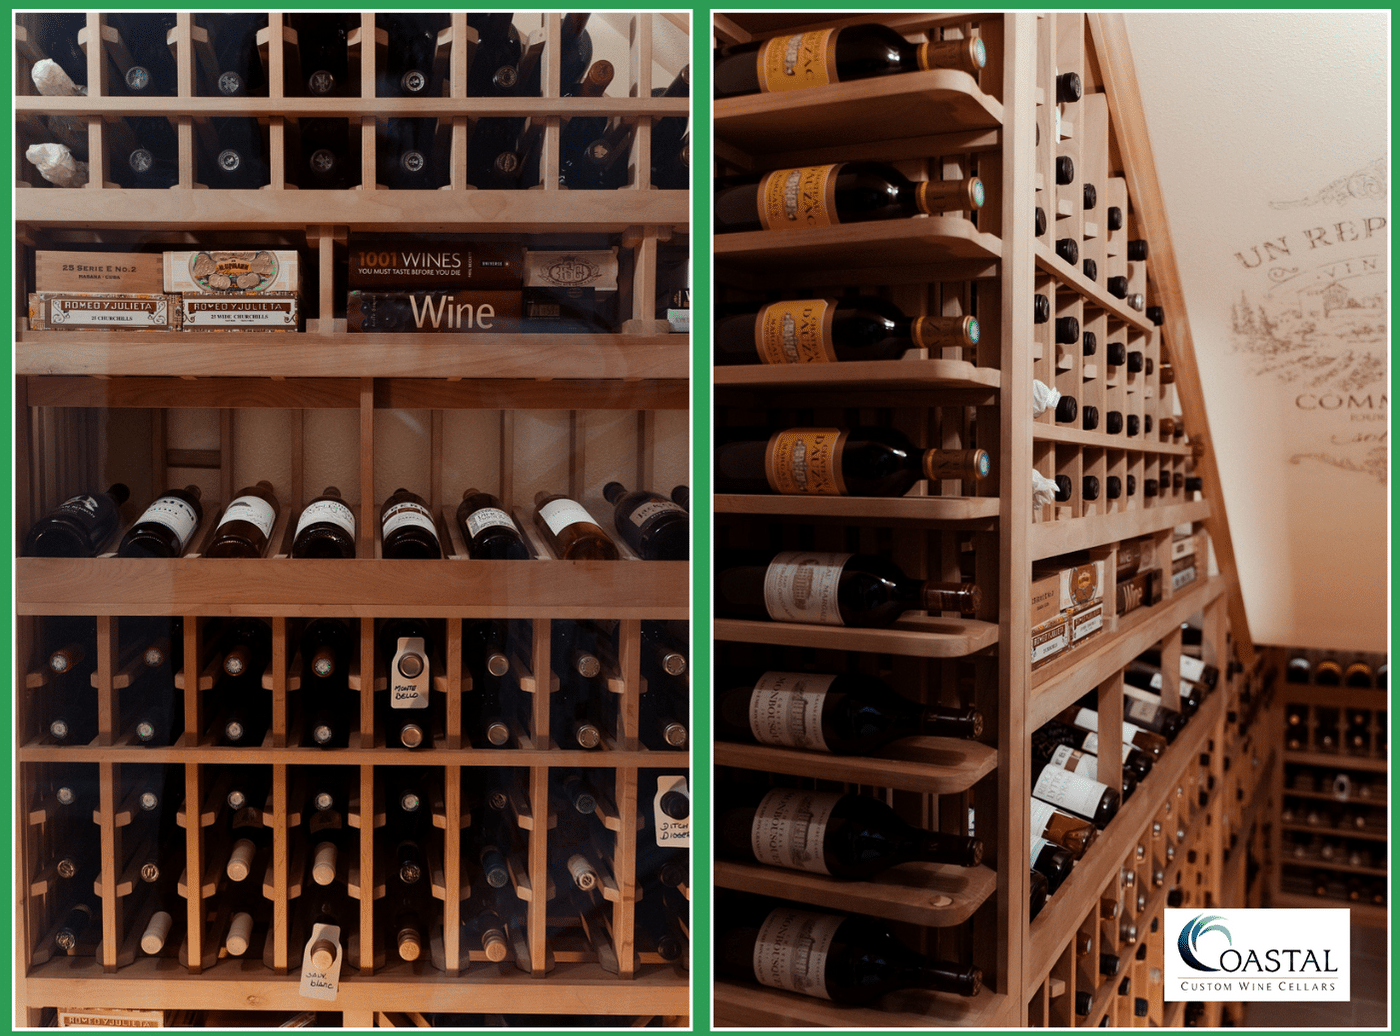 Wooden Wine Rack Design For This Lovely Custom Wine Cellar Under the Stairs